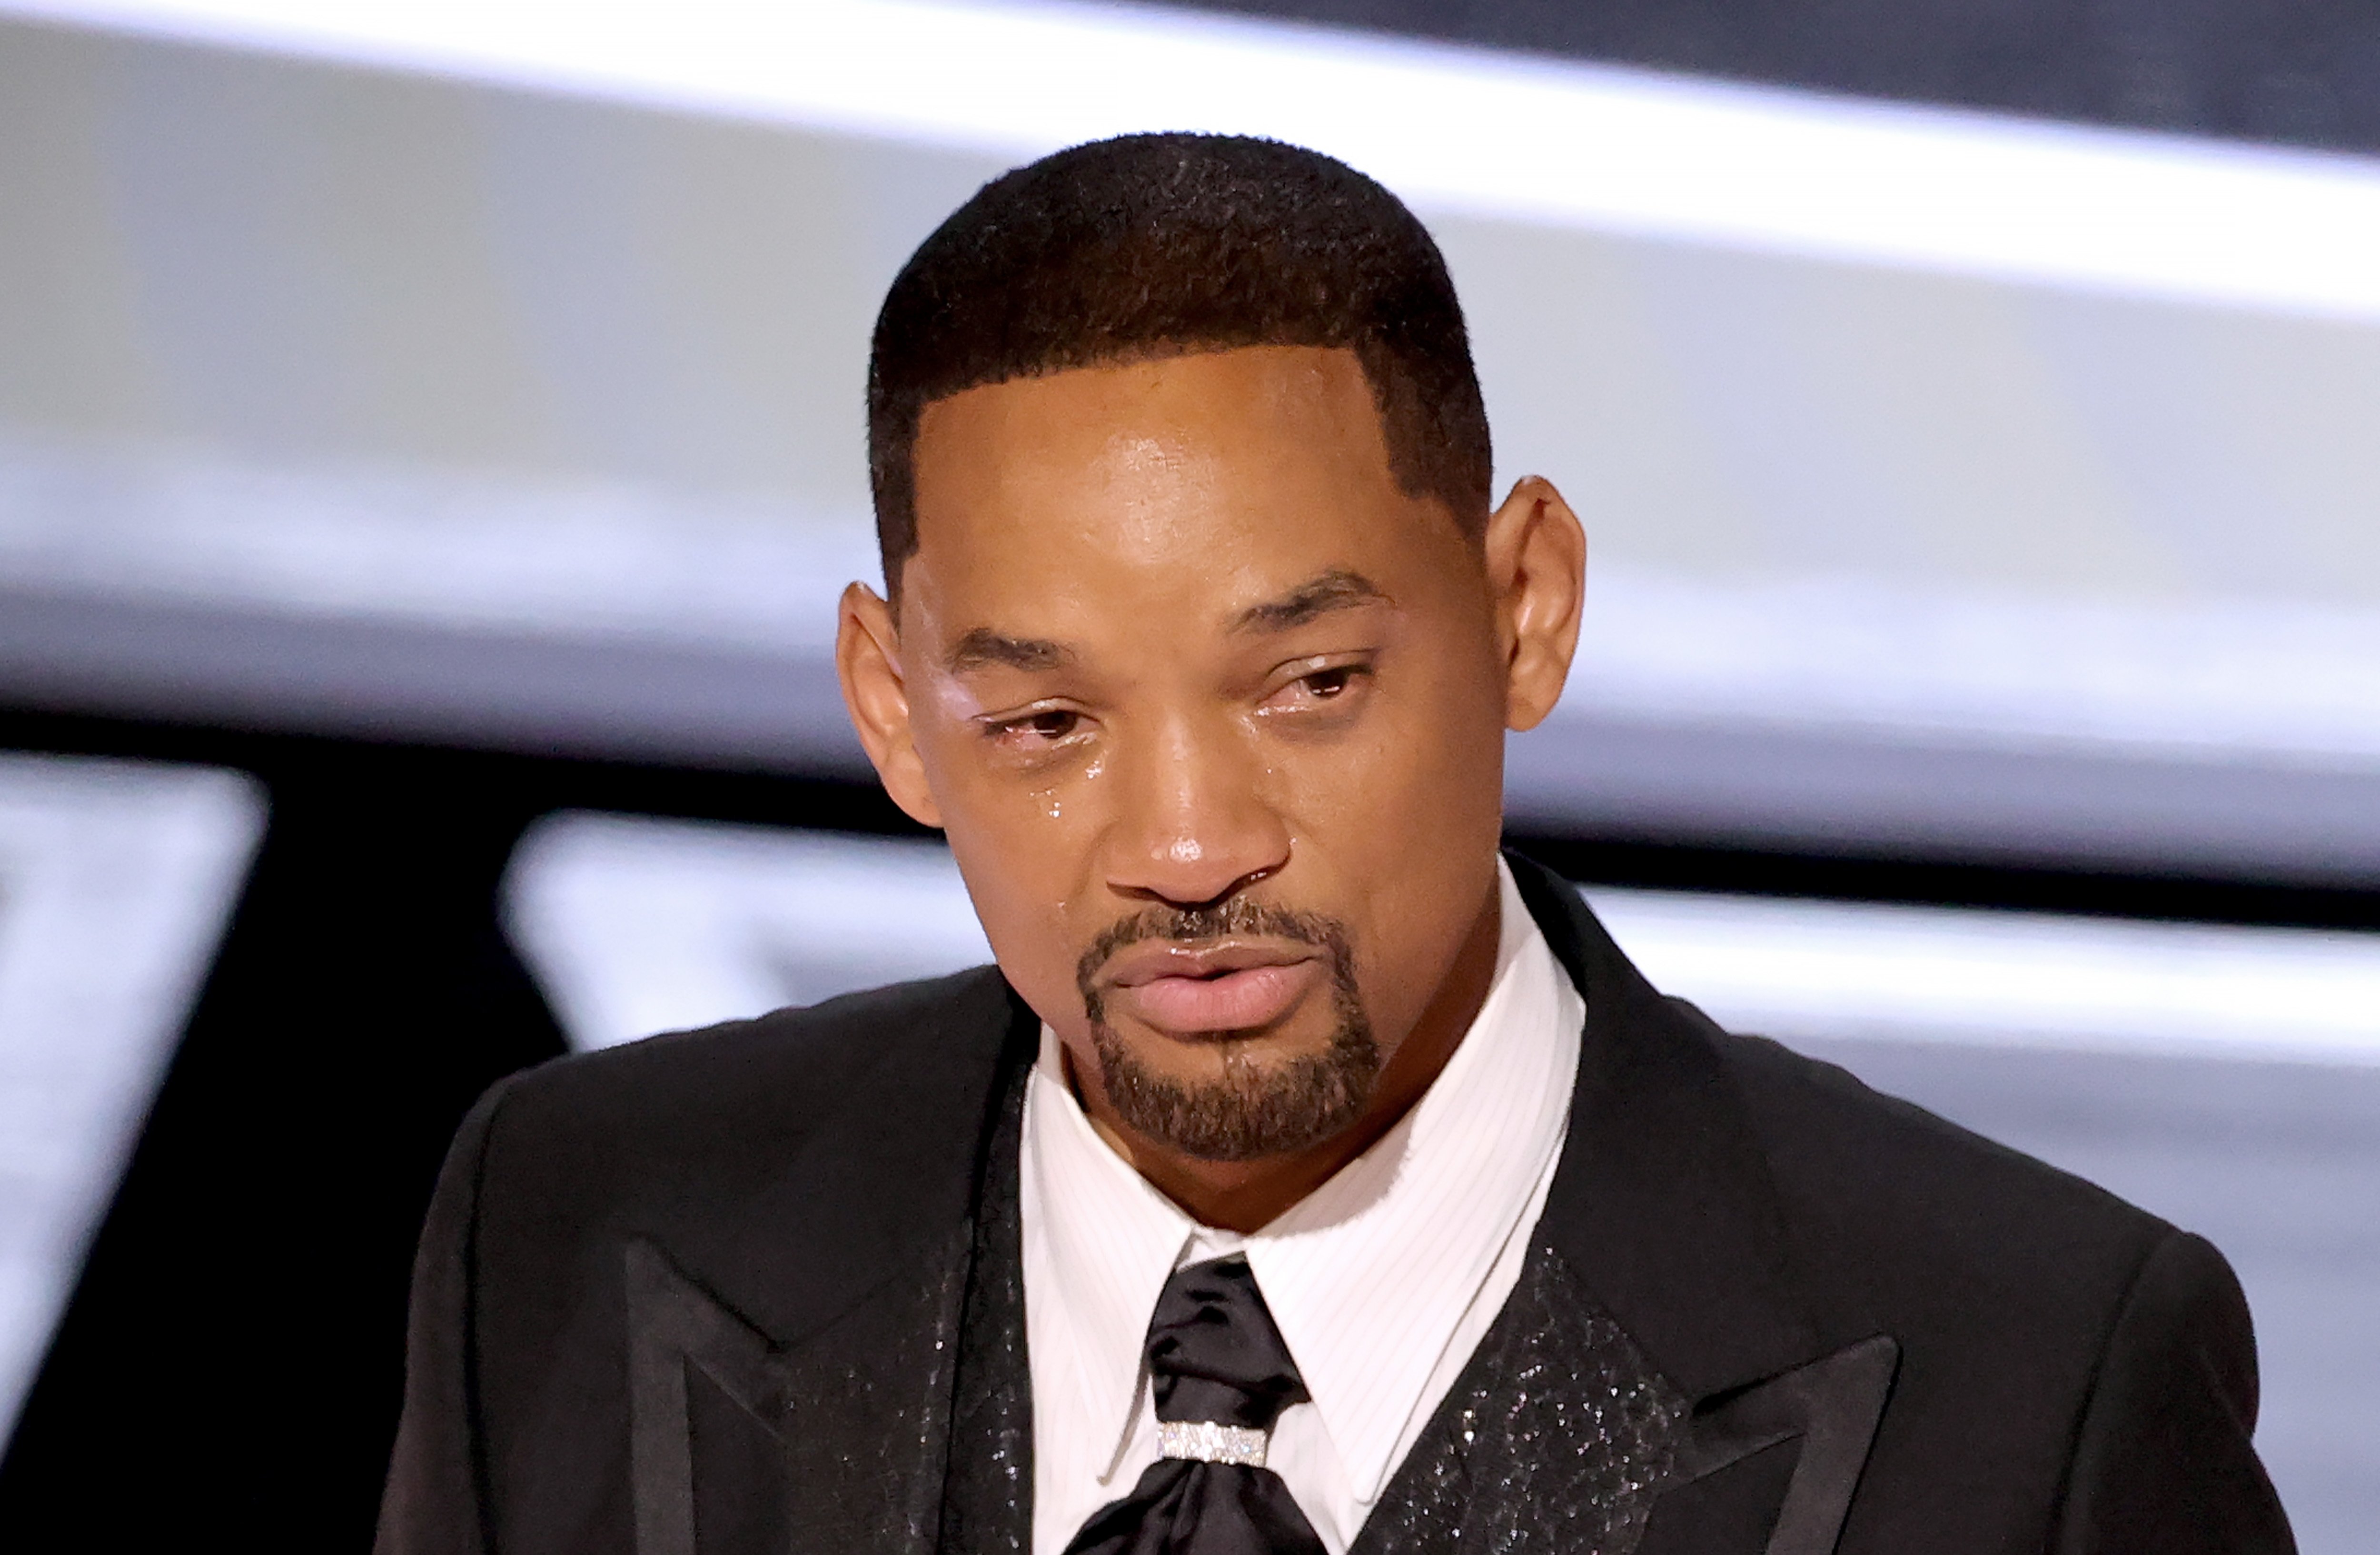 Will Smith with tears in his eyes as he accepts the Oscar for Best Actor at the 2022 Academy Awards 